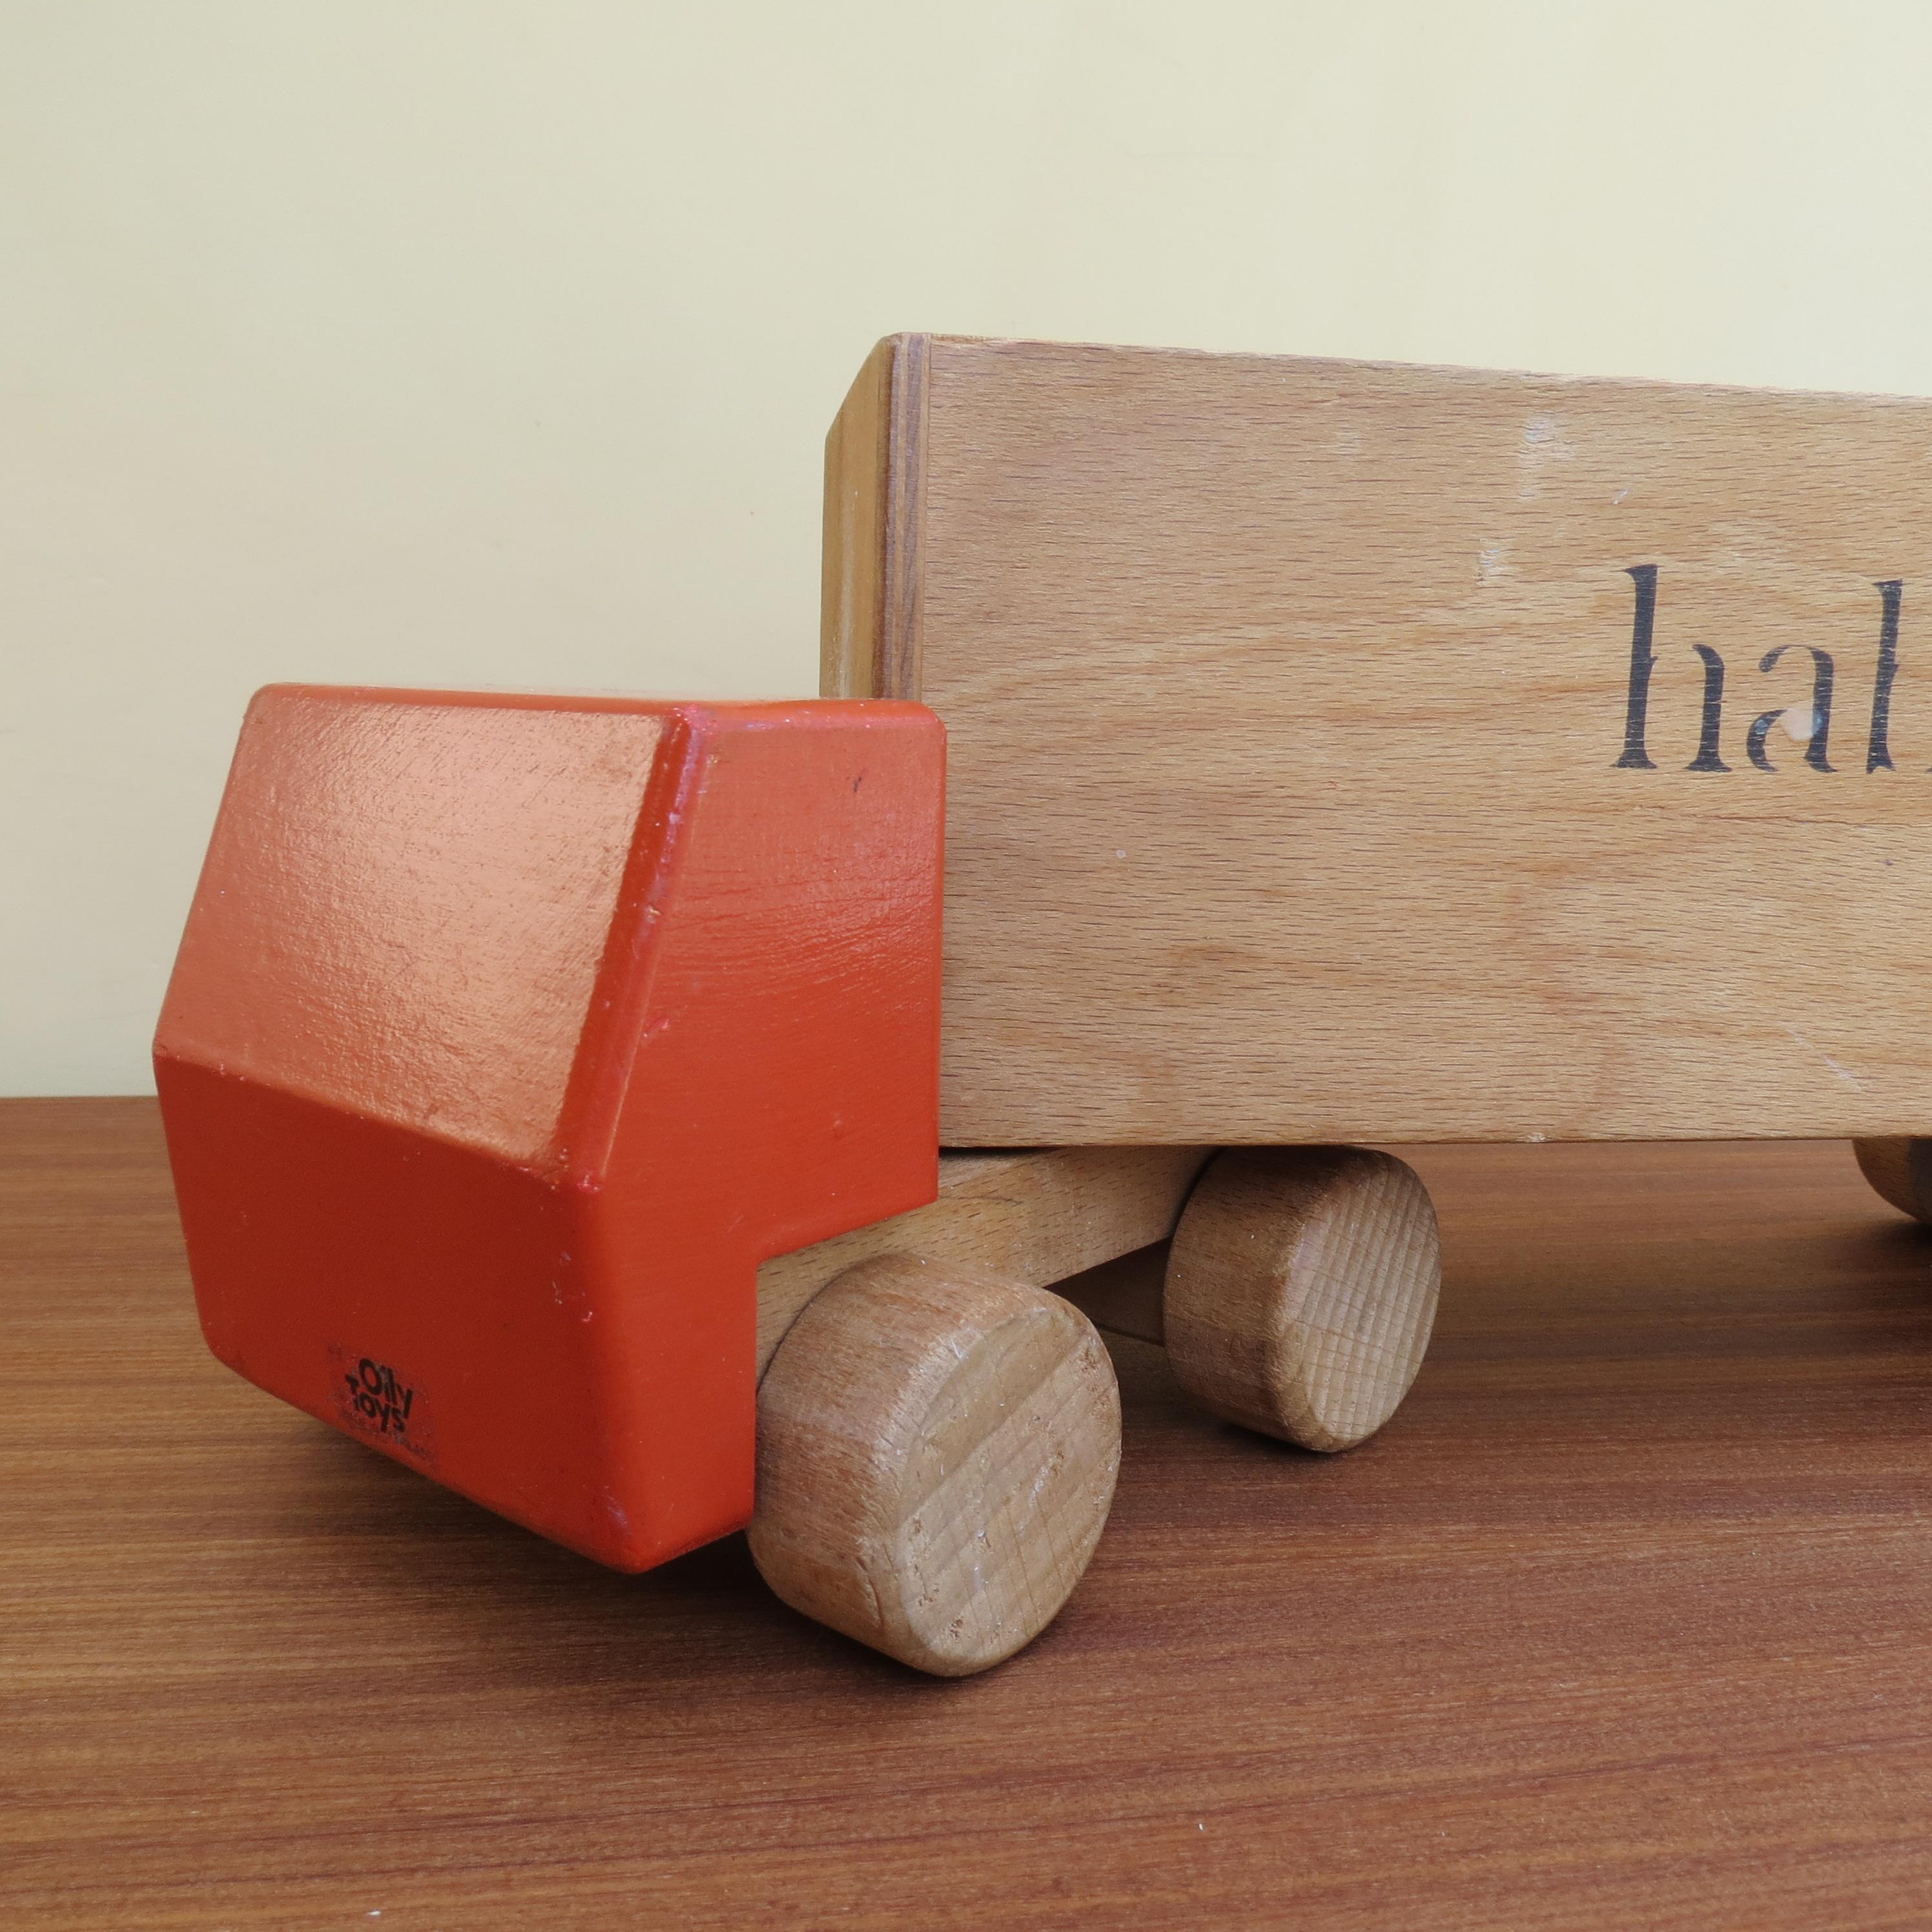 Mid-Century Modern 1970s Vintage Advertising Toy Lorry for Habitat Wooden Toy Lorry by Ryk Heuff